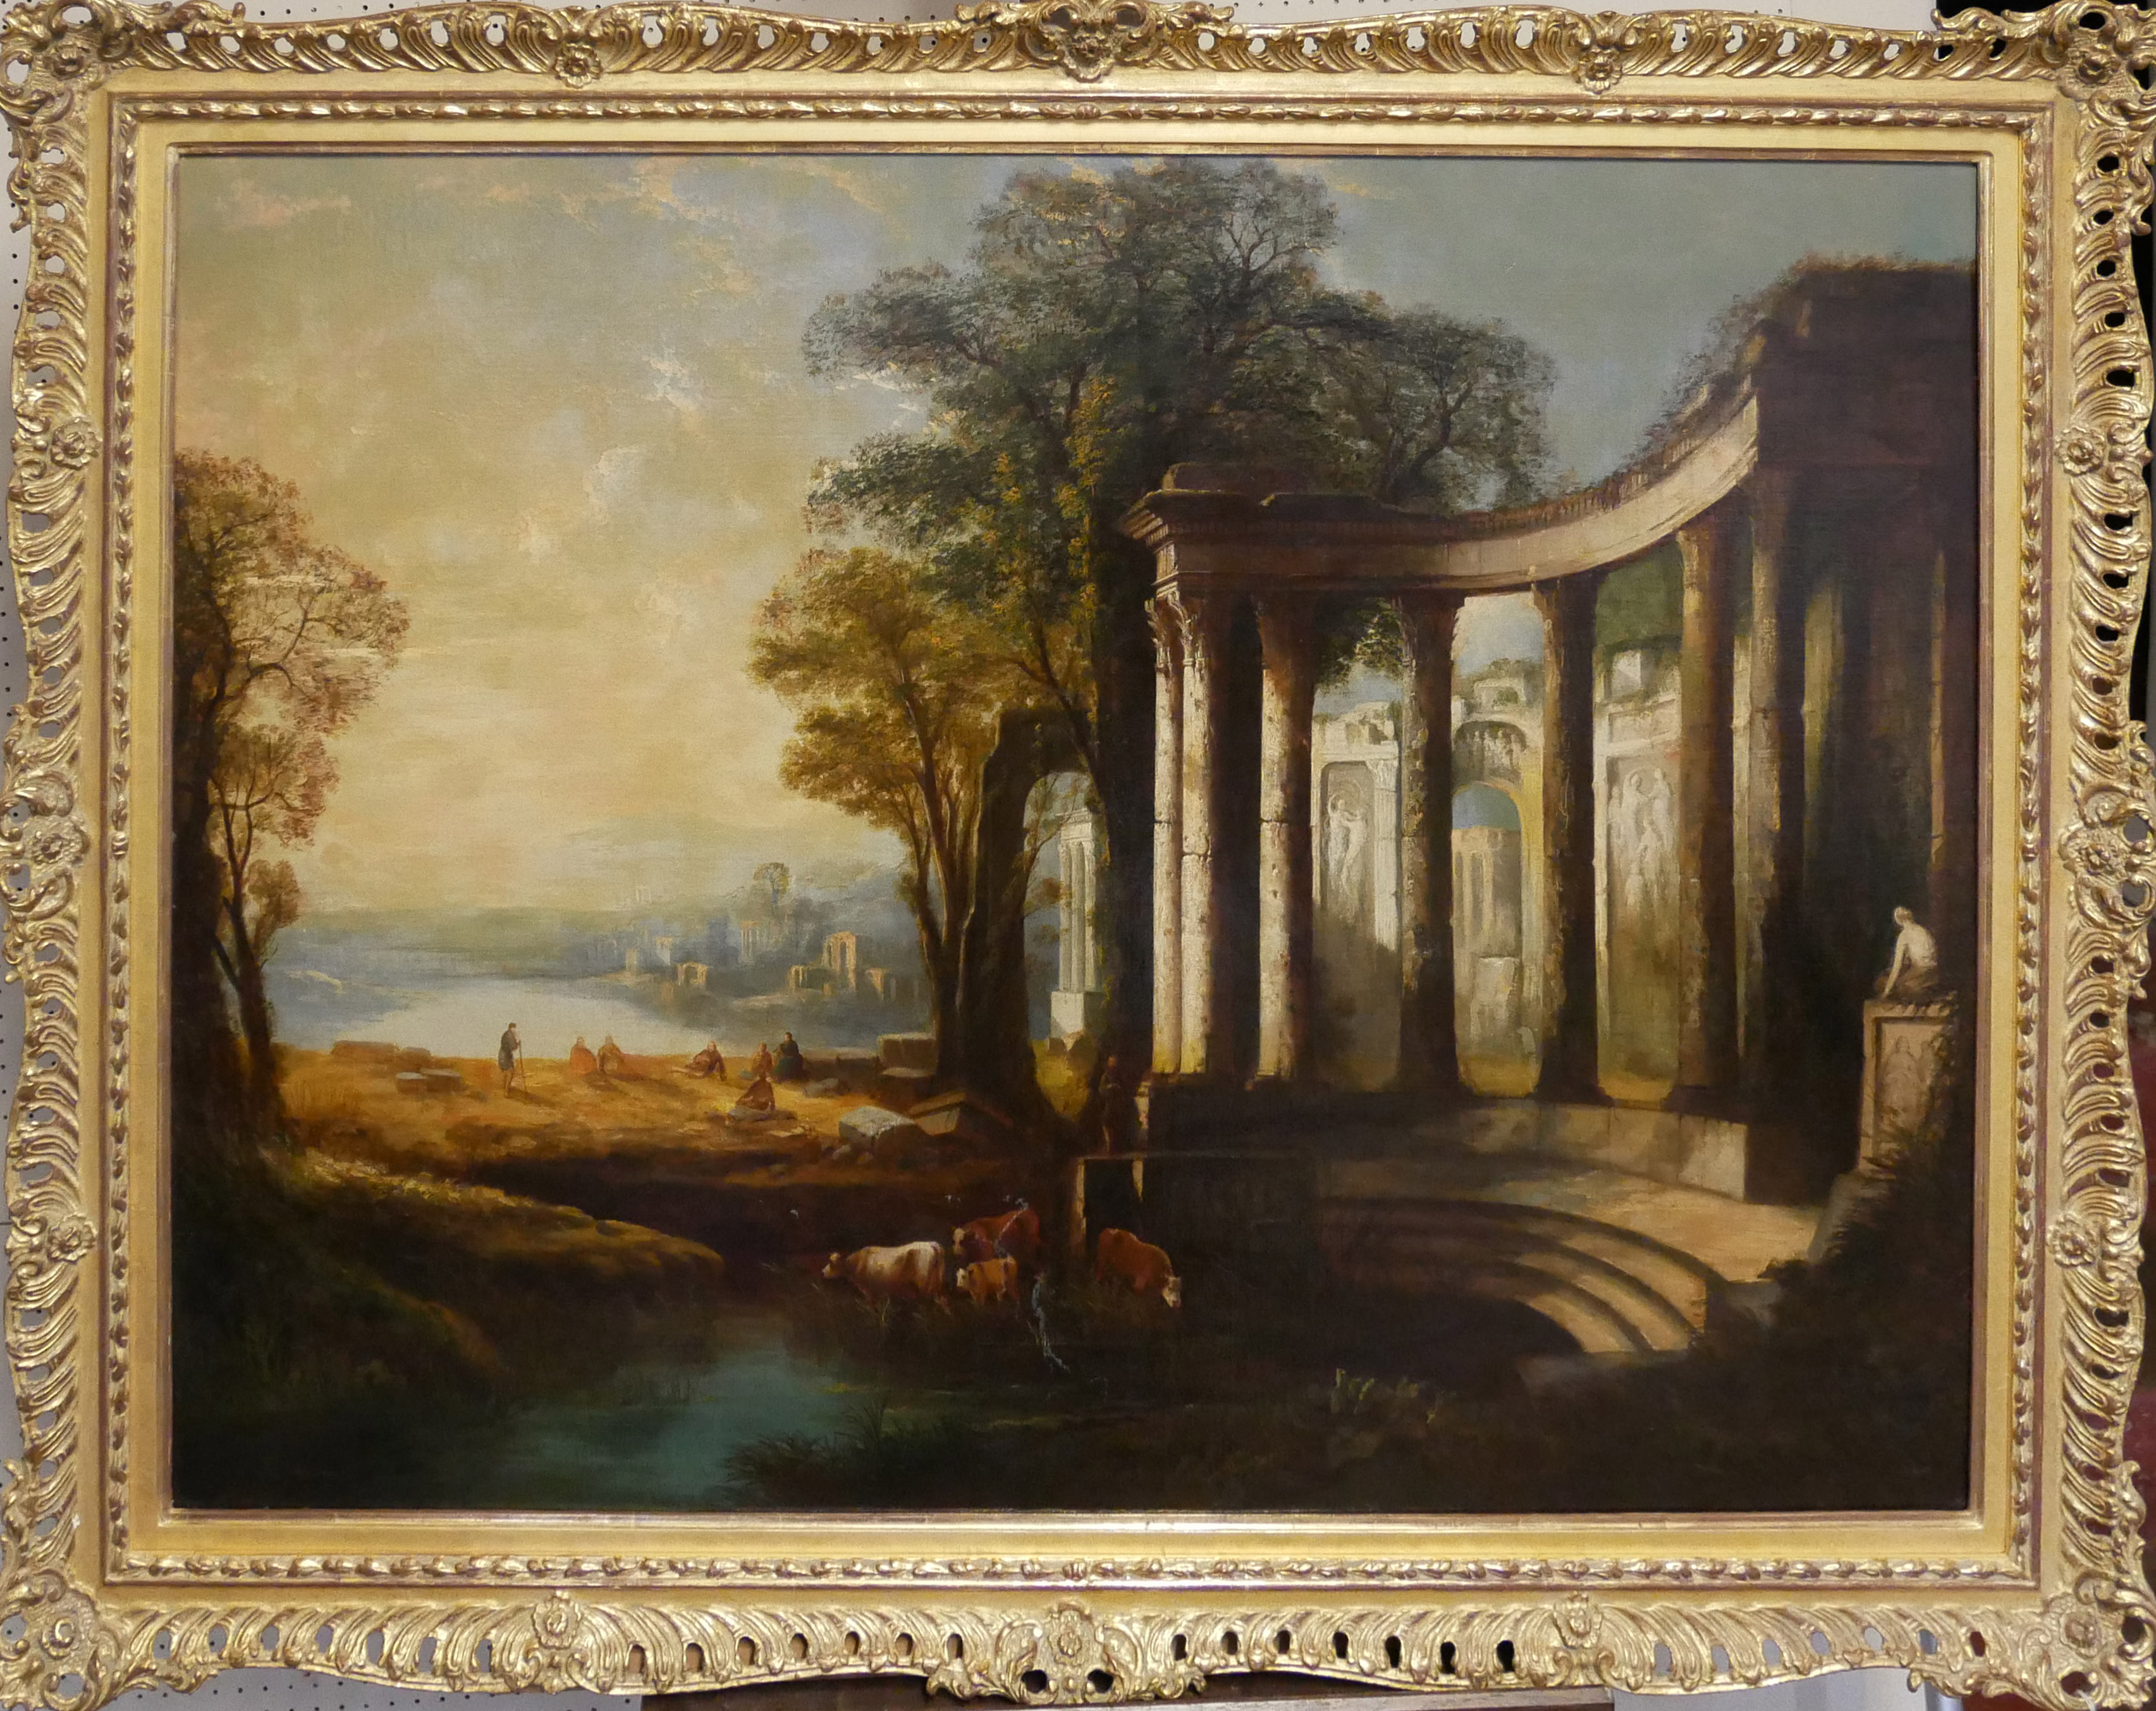 A LARGE 18TH CENTURY OIL ON CANVAS, CLASSICAL ITALIAN RIVER RUIN Landscape, figures, cattle and city - Image 2 of 9